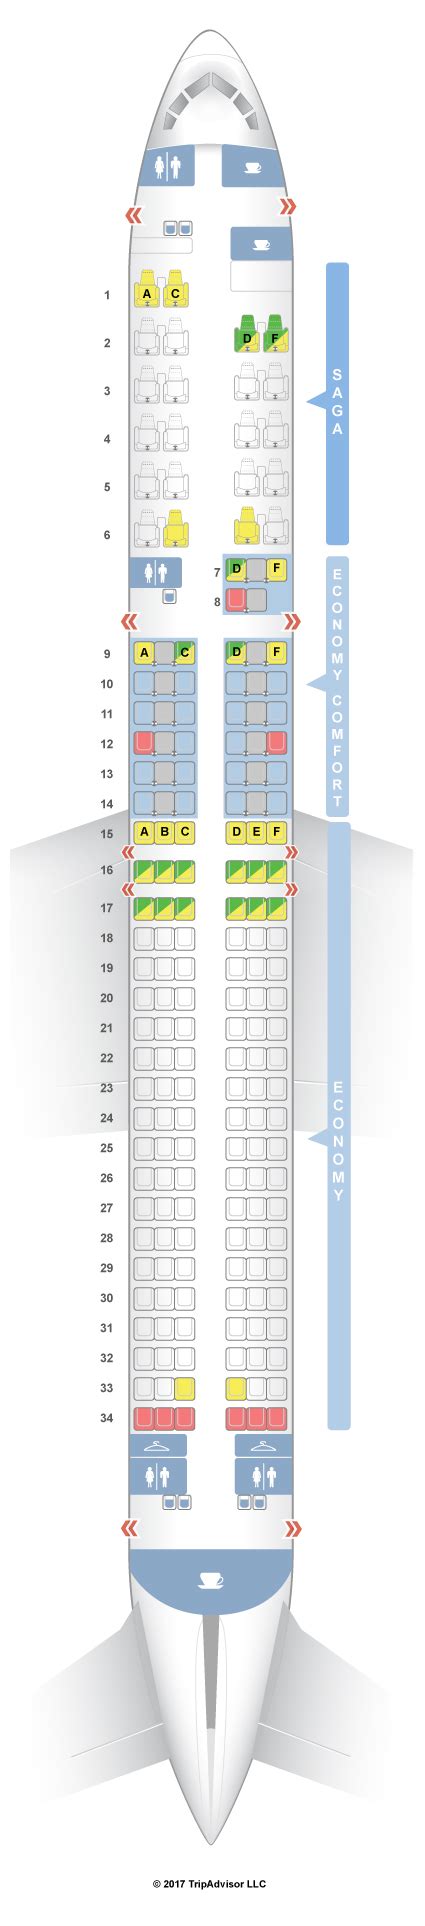 Answer 1 of 10: On Icelandair flight 635 (yesterday, July 20, 2012), a Boeing 757-200, row 11 was an exit row for regular Economy. This differs from the Seat Guru seat map.